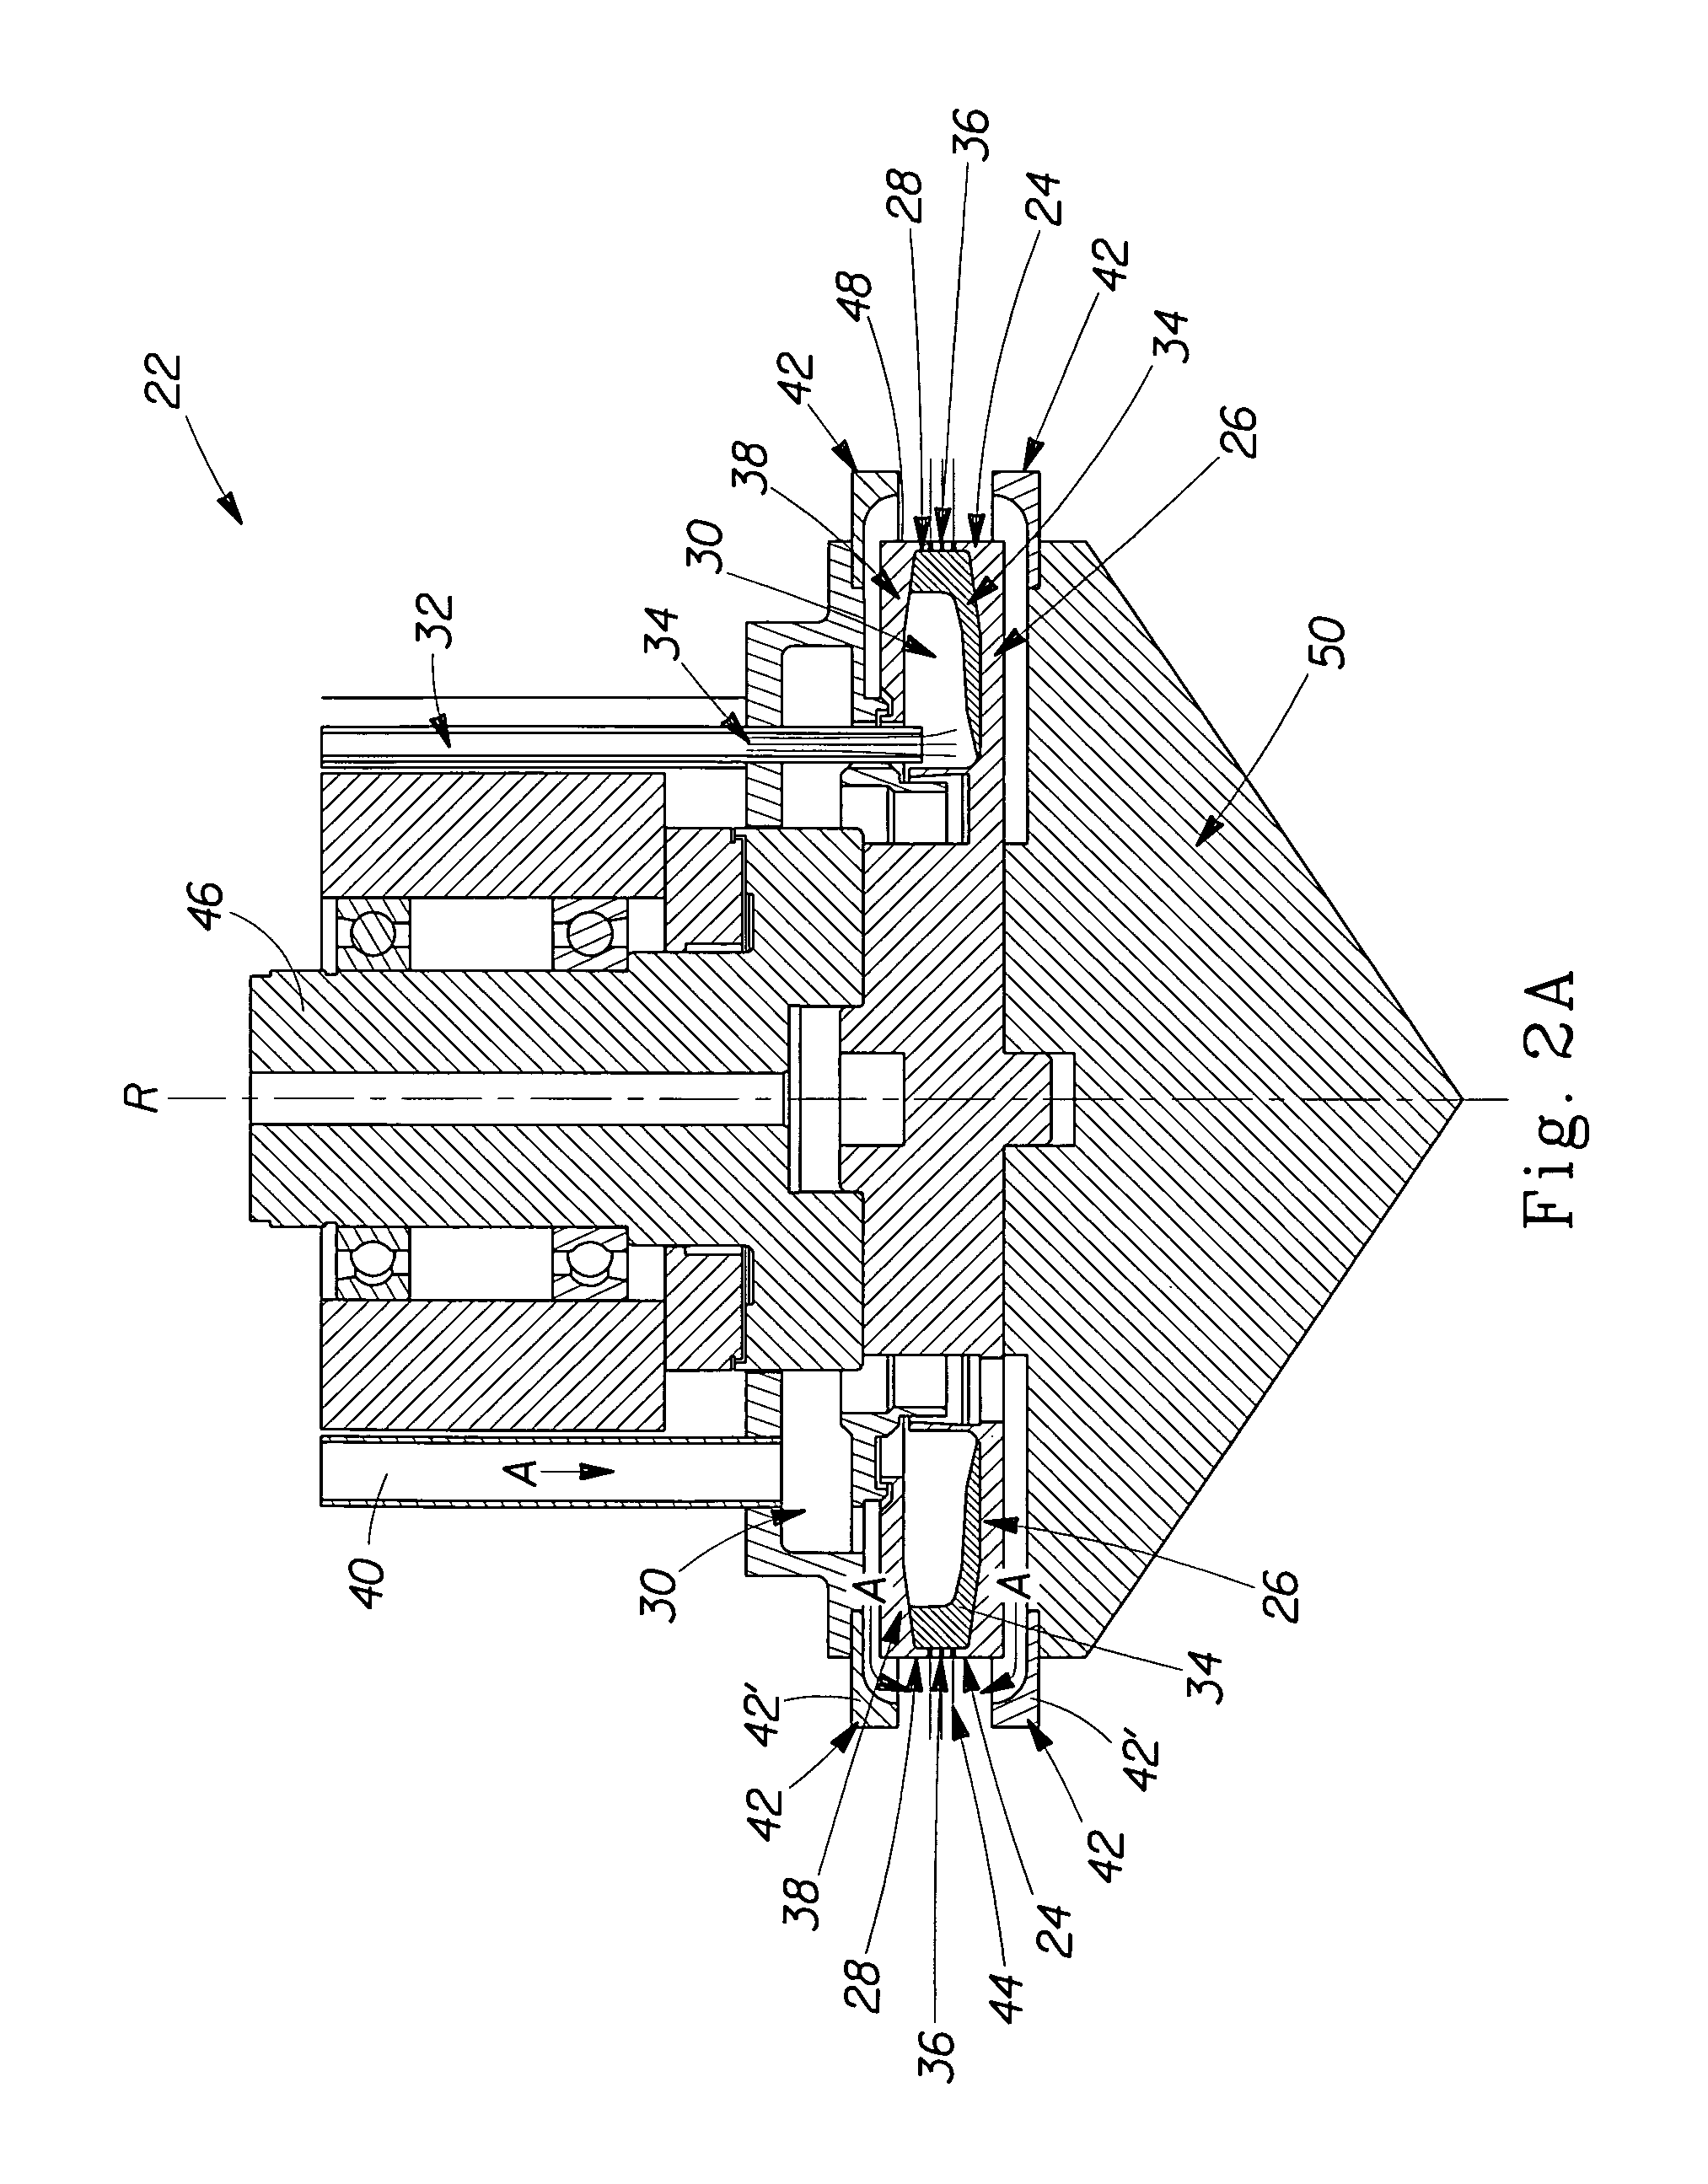 Rotary spinning processes for forming hydroxyl polymer-containing fibers